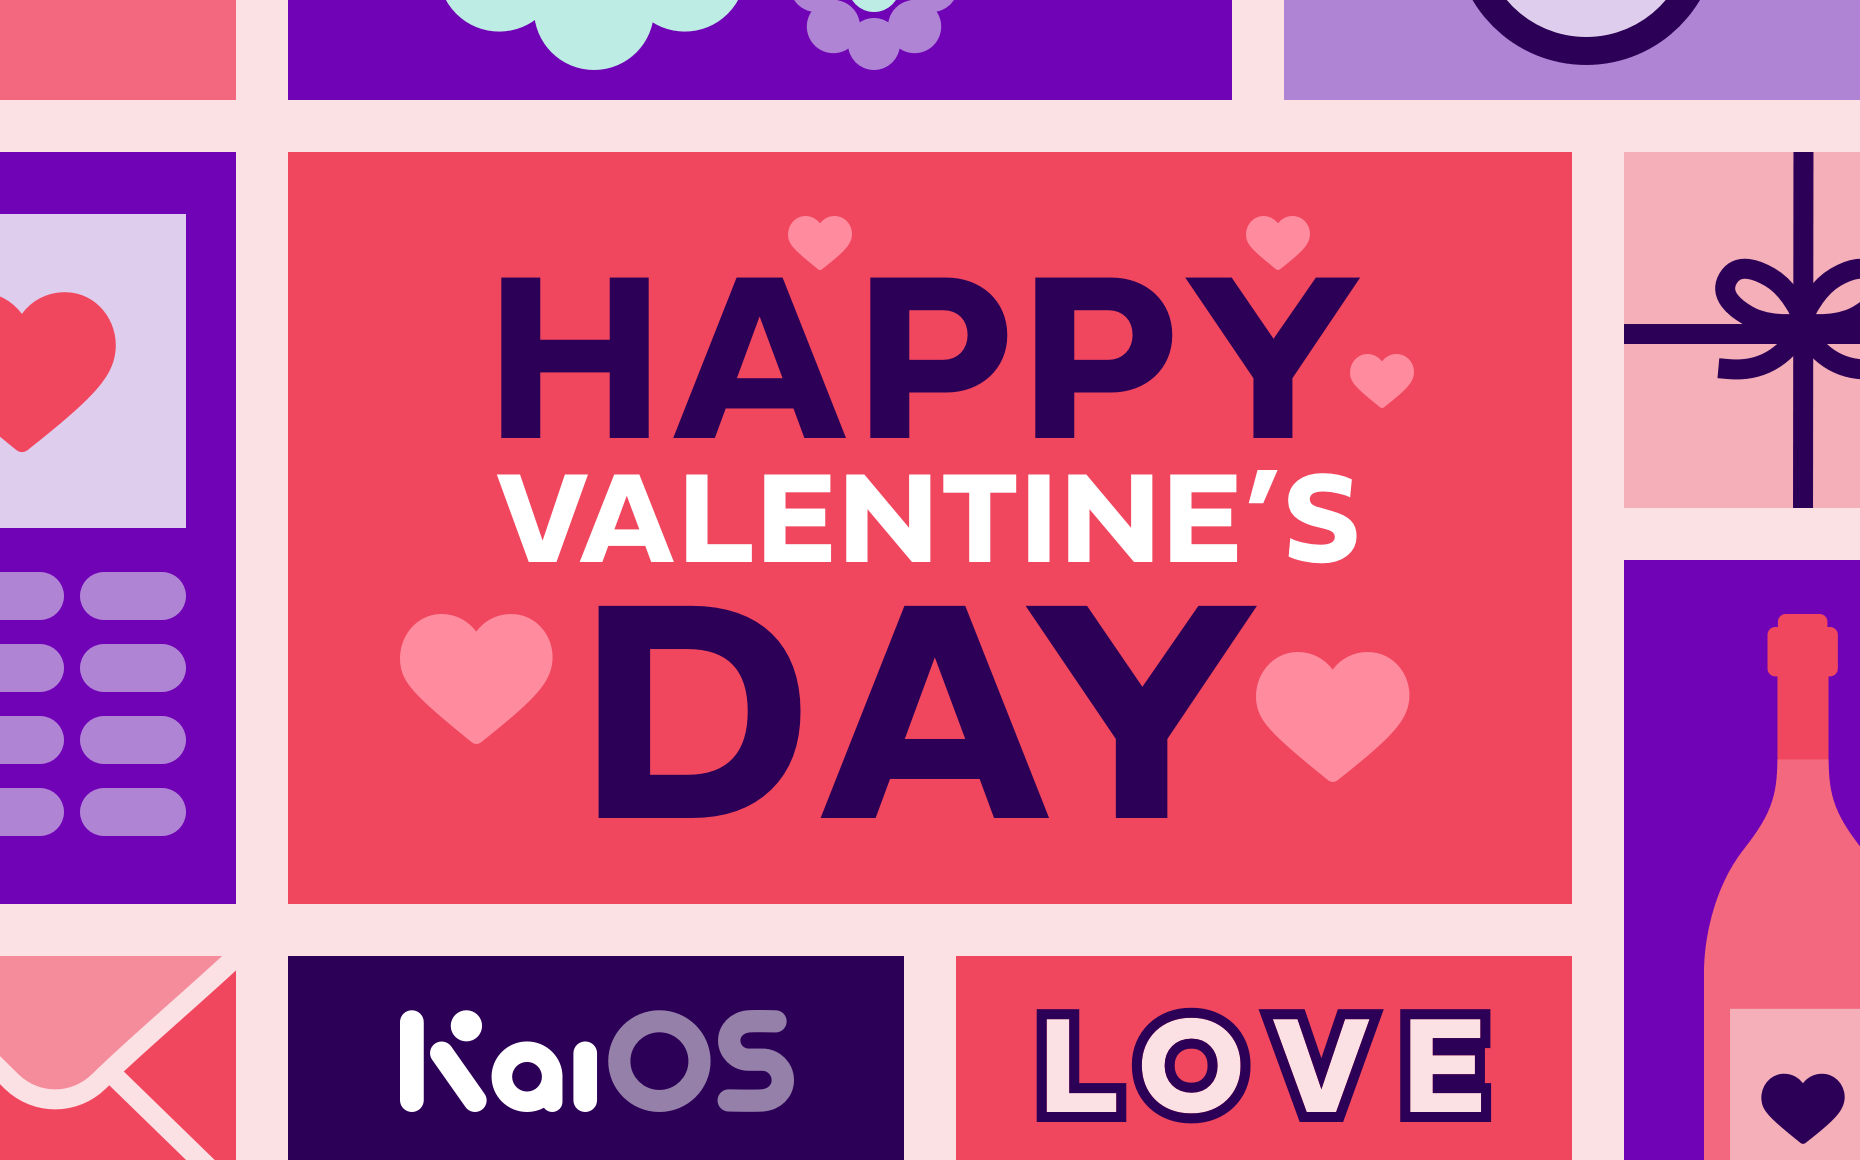 KaiOS wishes you a happy Valentine’s Day!